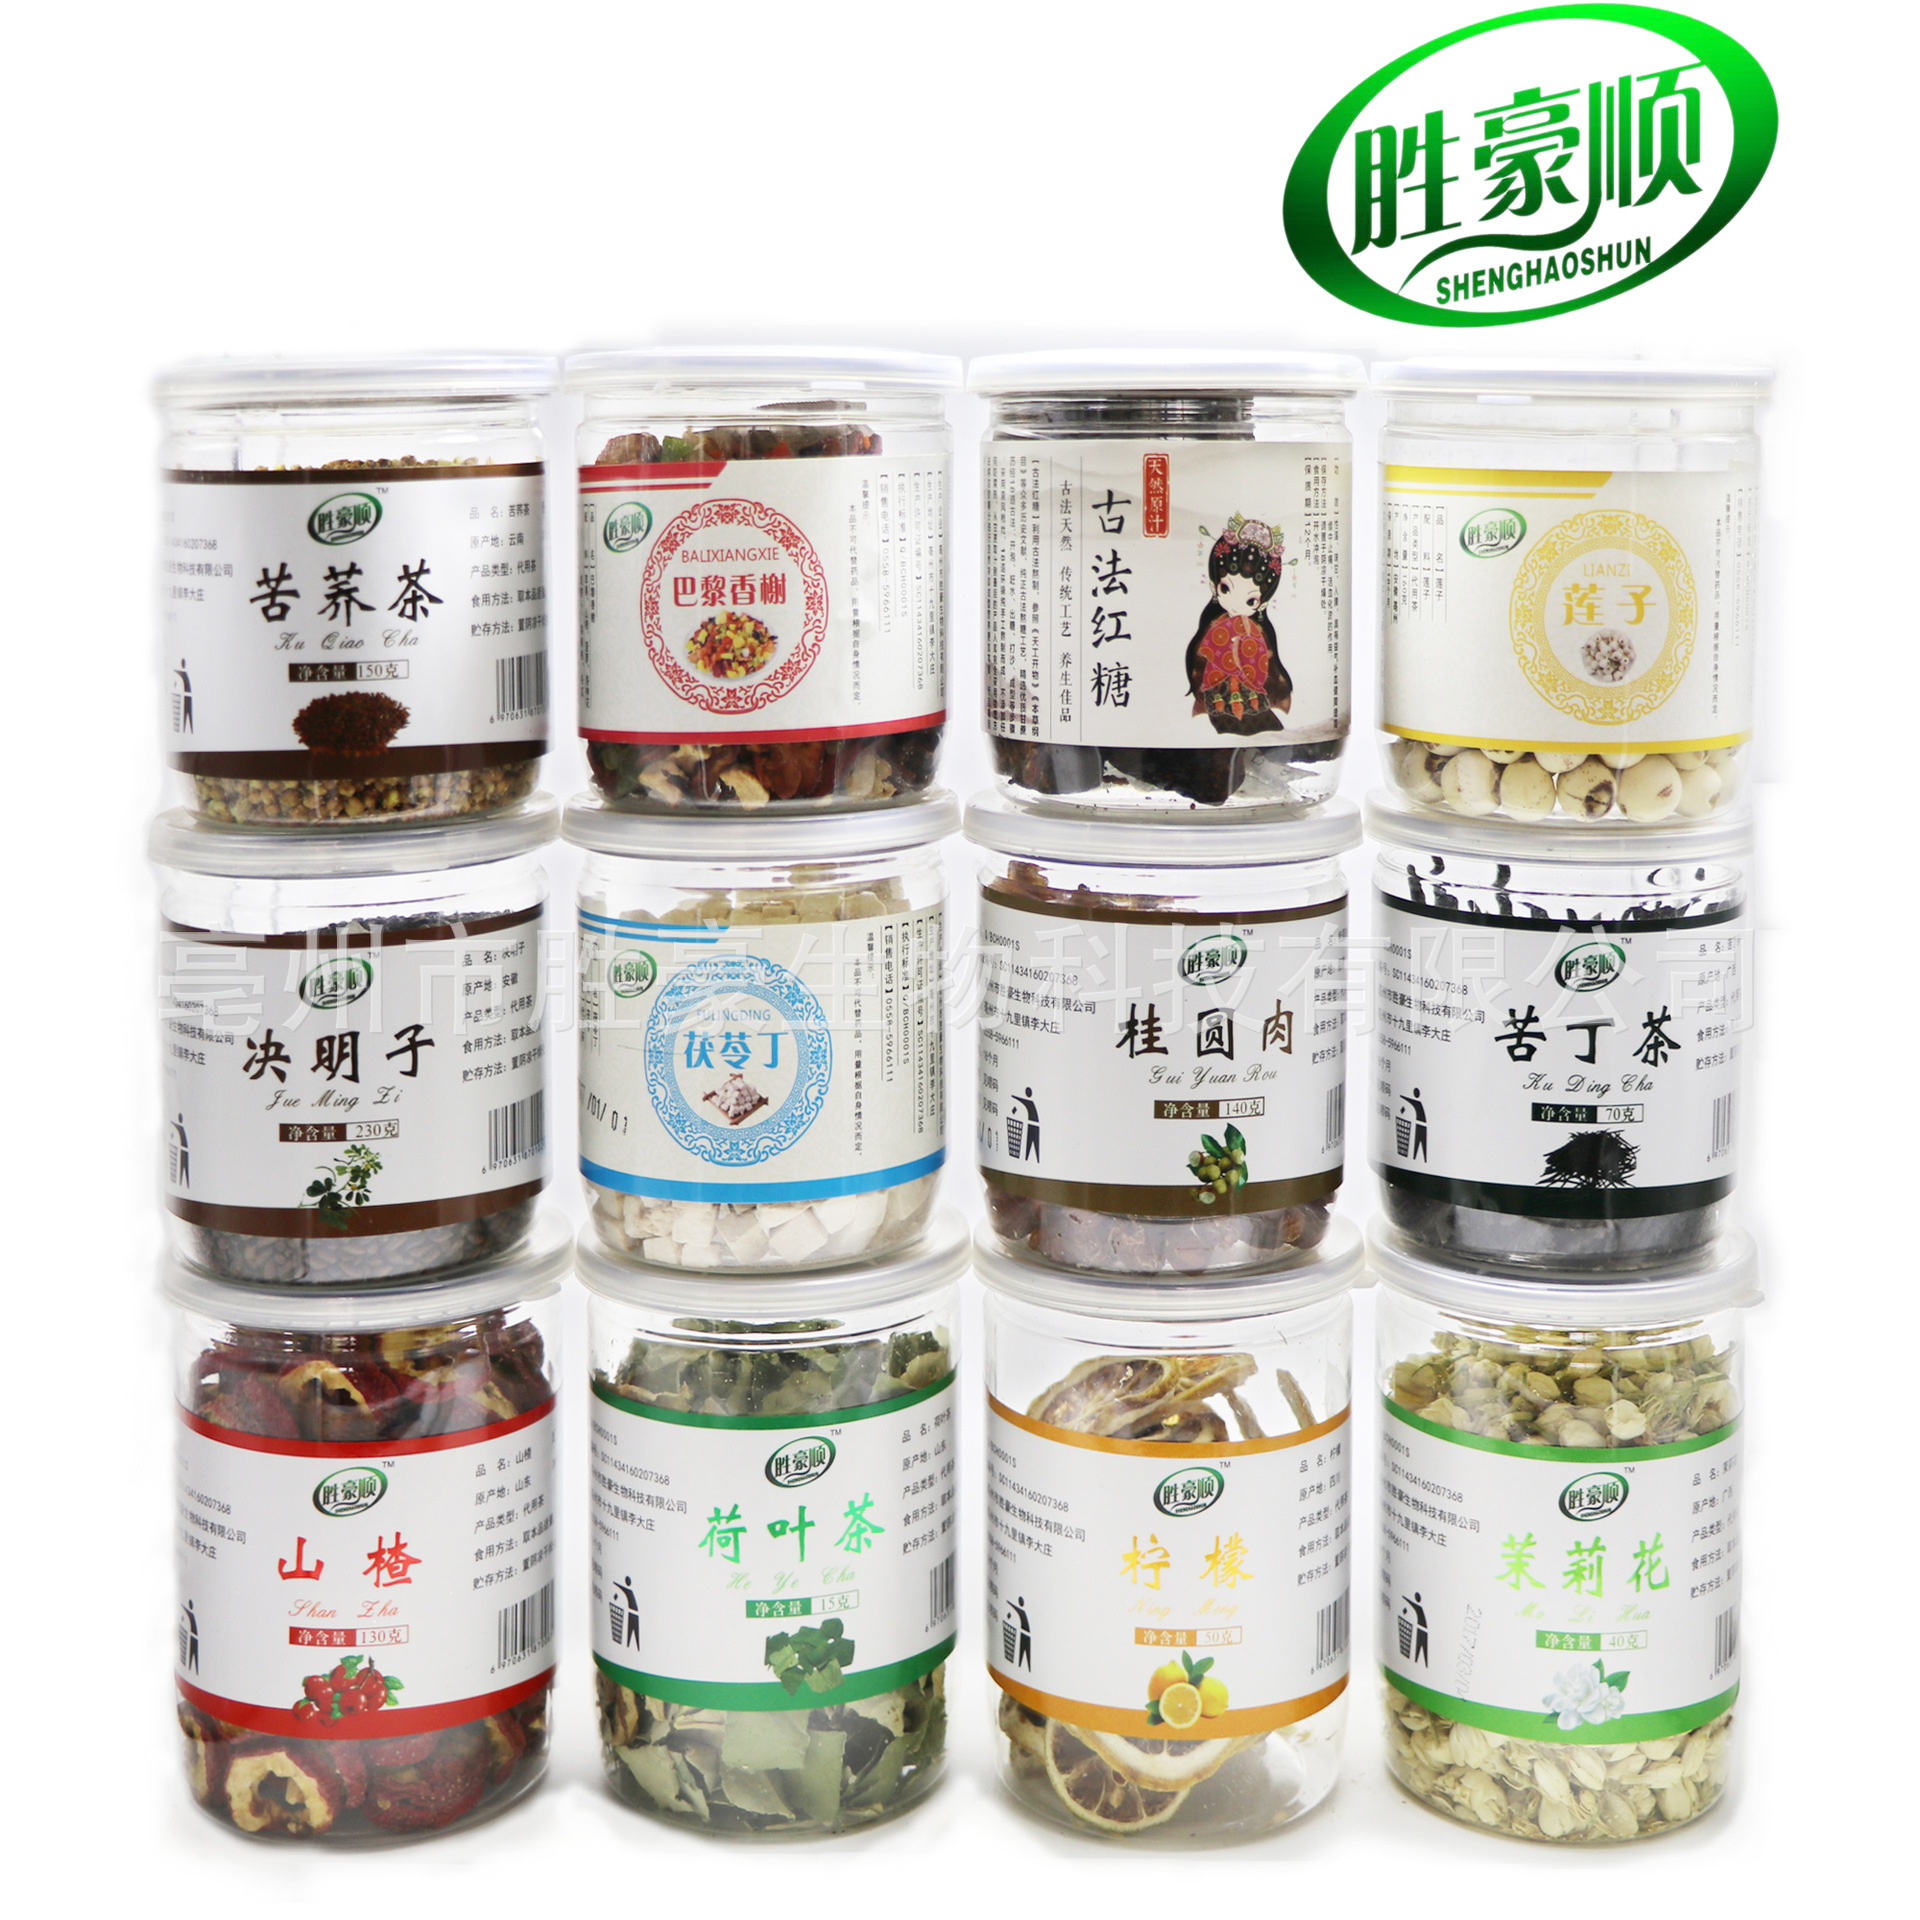 Shenghao Shun/Various scented tea Canned Combination of tea/ Herbal tea/Flower nectar/wholesale oem Processing